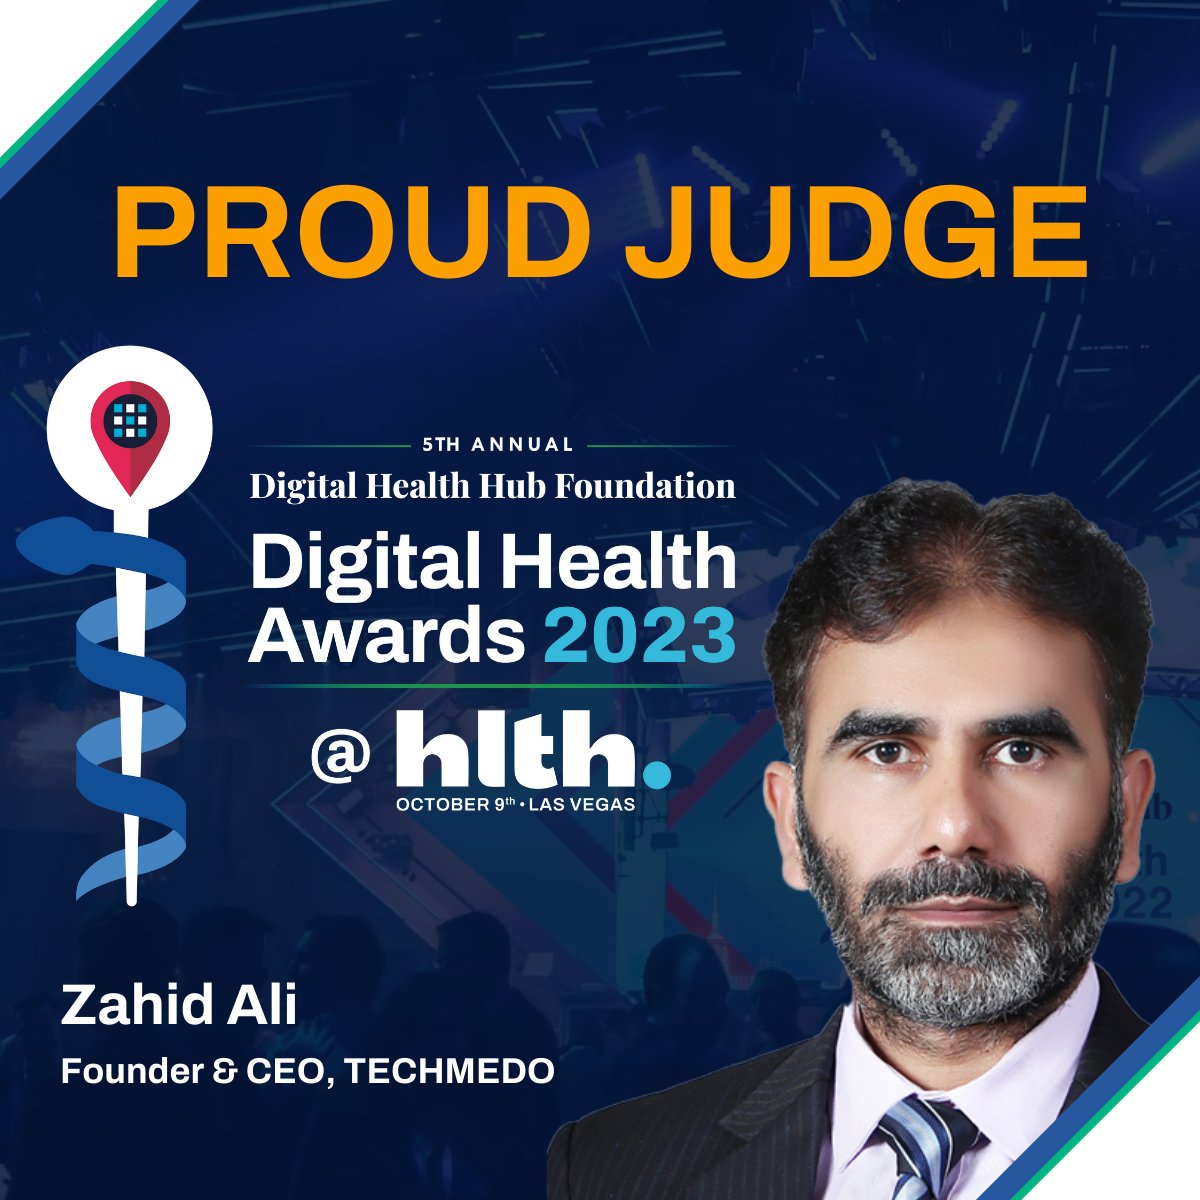 I am so proud to be a judge for The Digital Health Foundation Digital Health Awards, the biggest healthcare award show in the world held at HLTH! Take a look at all of the categories

digitalhealthhub.org/awards/2023/20… 

Don't miss the award ceremony Oct 9th

#hlth23 #digitalhealth #health